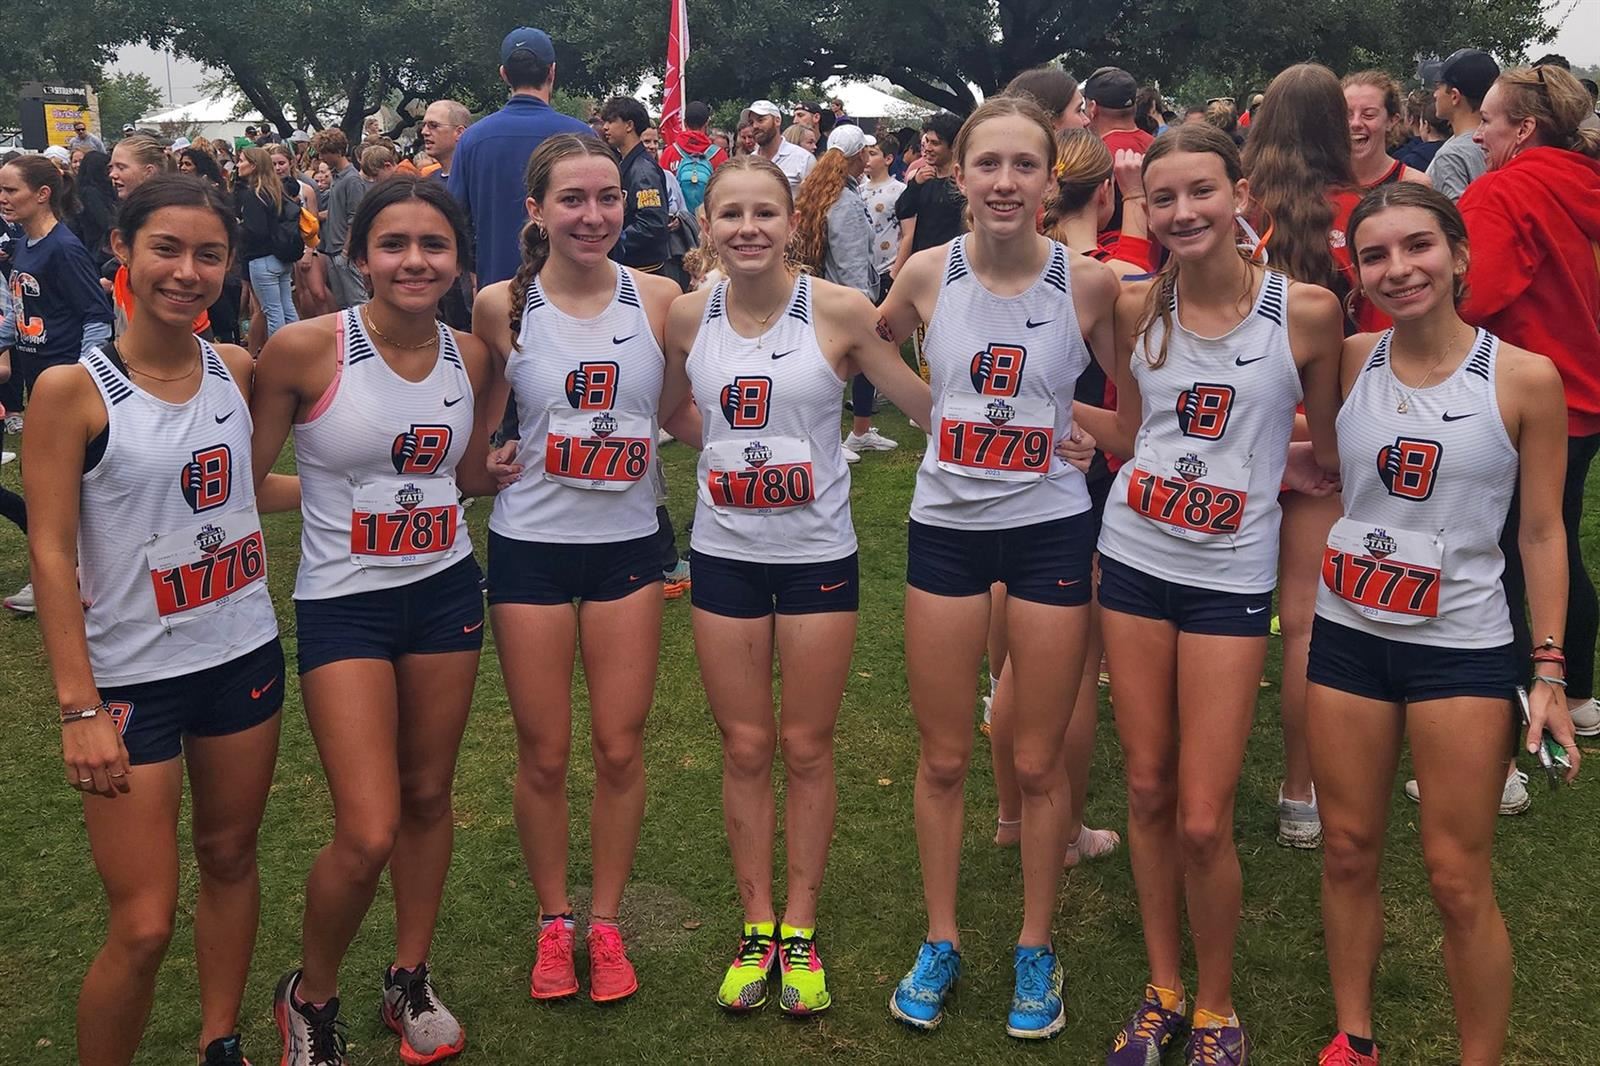 The Bridgeland girls’ cross country team placed seventh overall as a team at the UIL Cross Country State Championships.